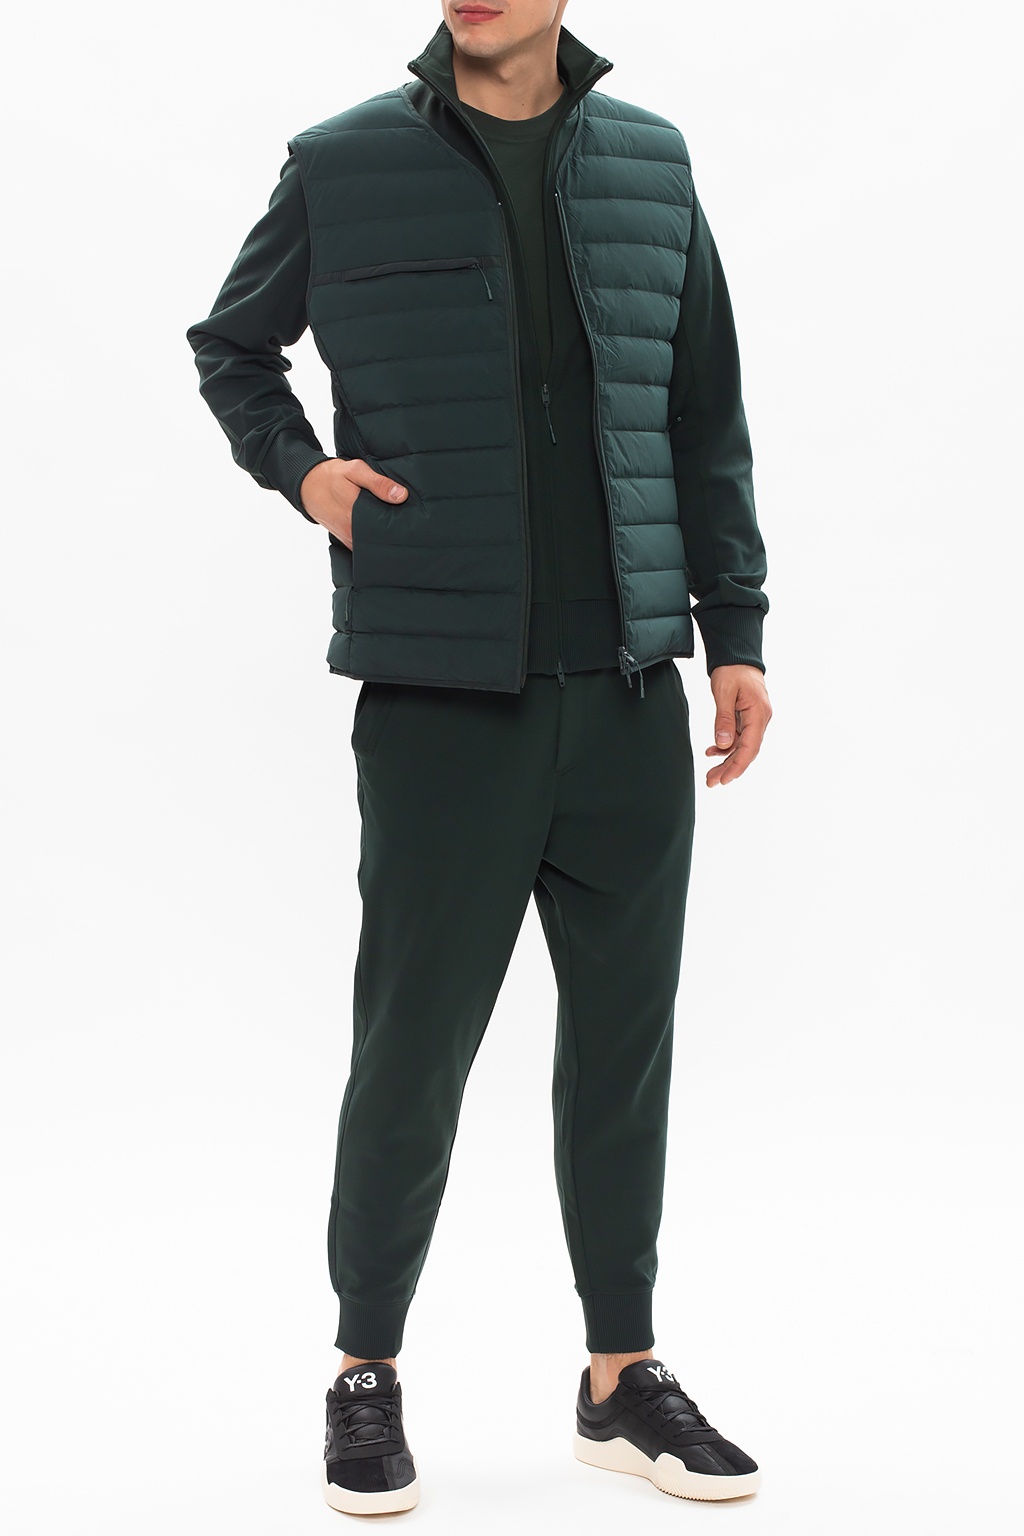 adidas Y-3 Quilted Pants - Green